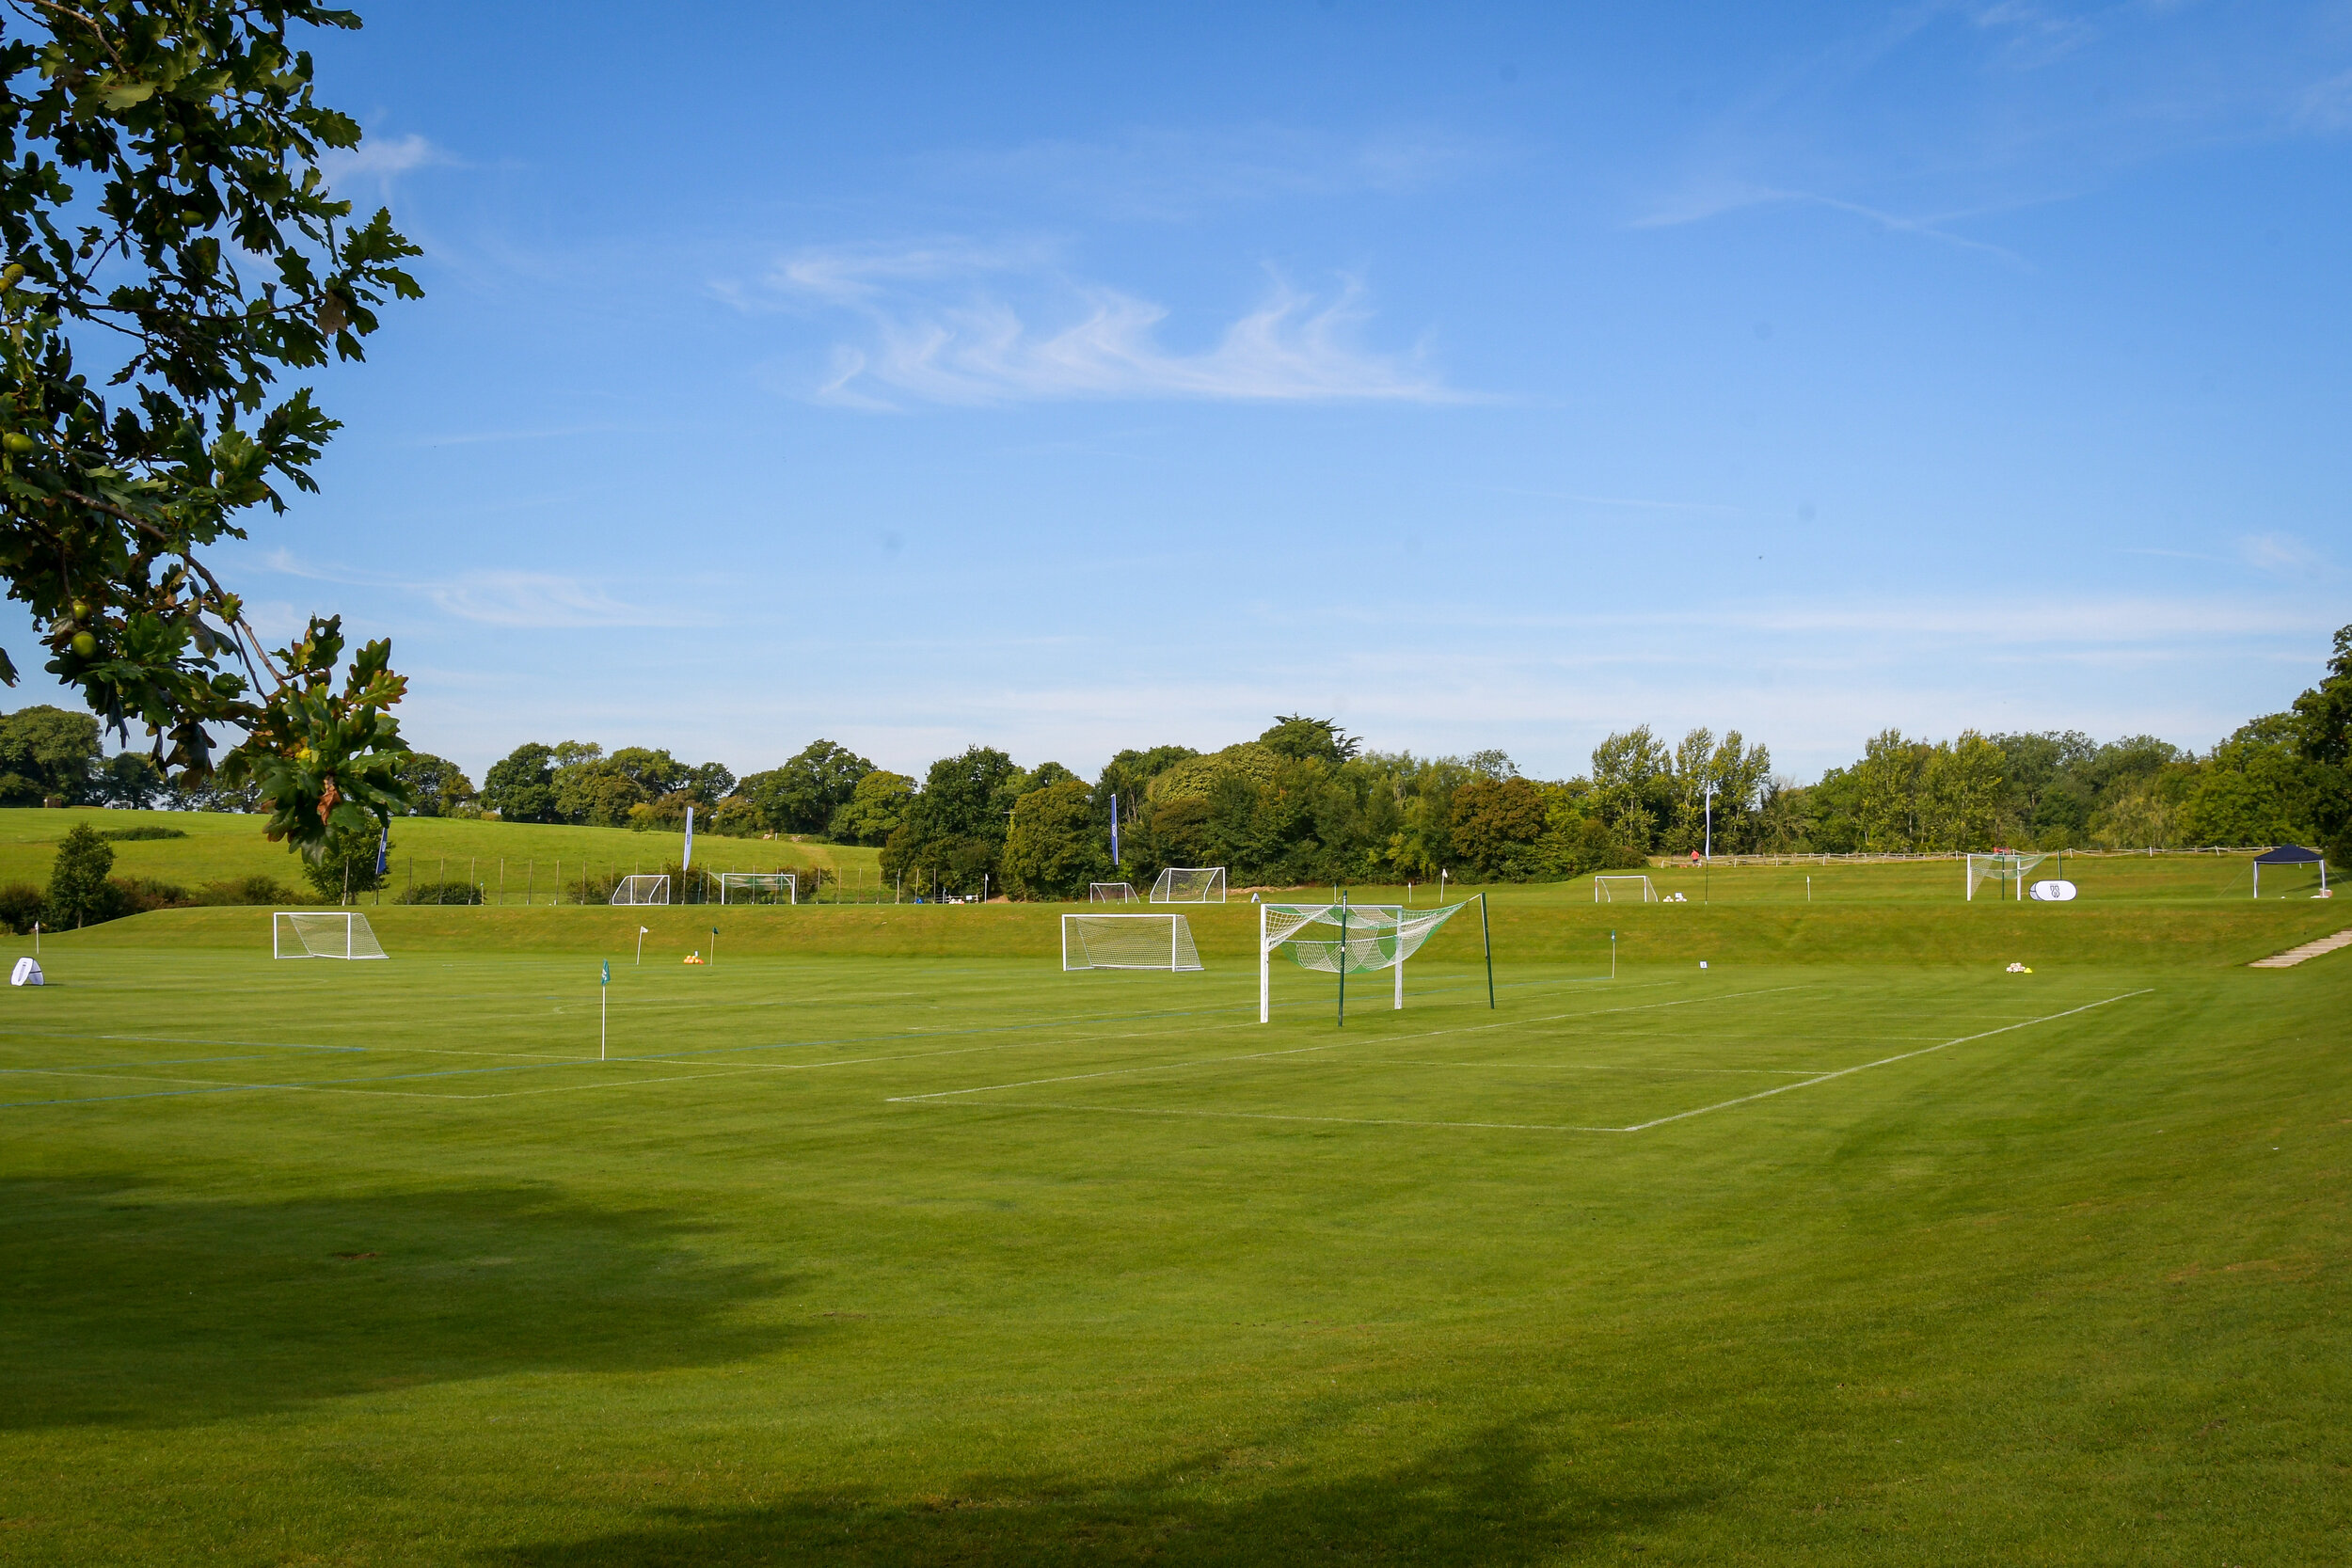  LaLiga Camps Football Pitches at Bede’s Summer School 